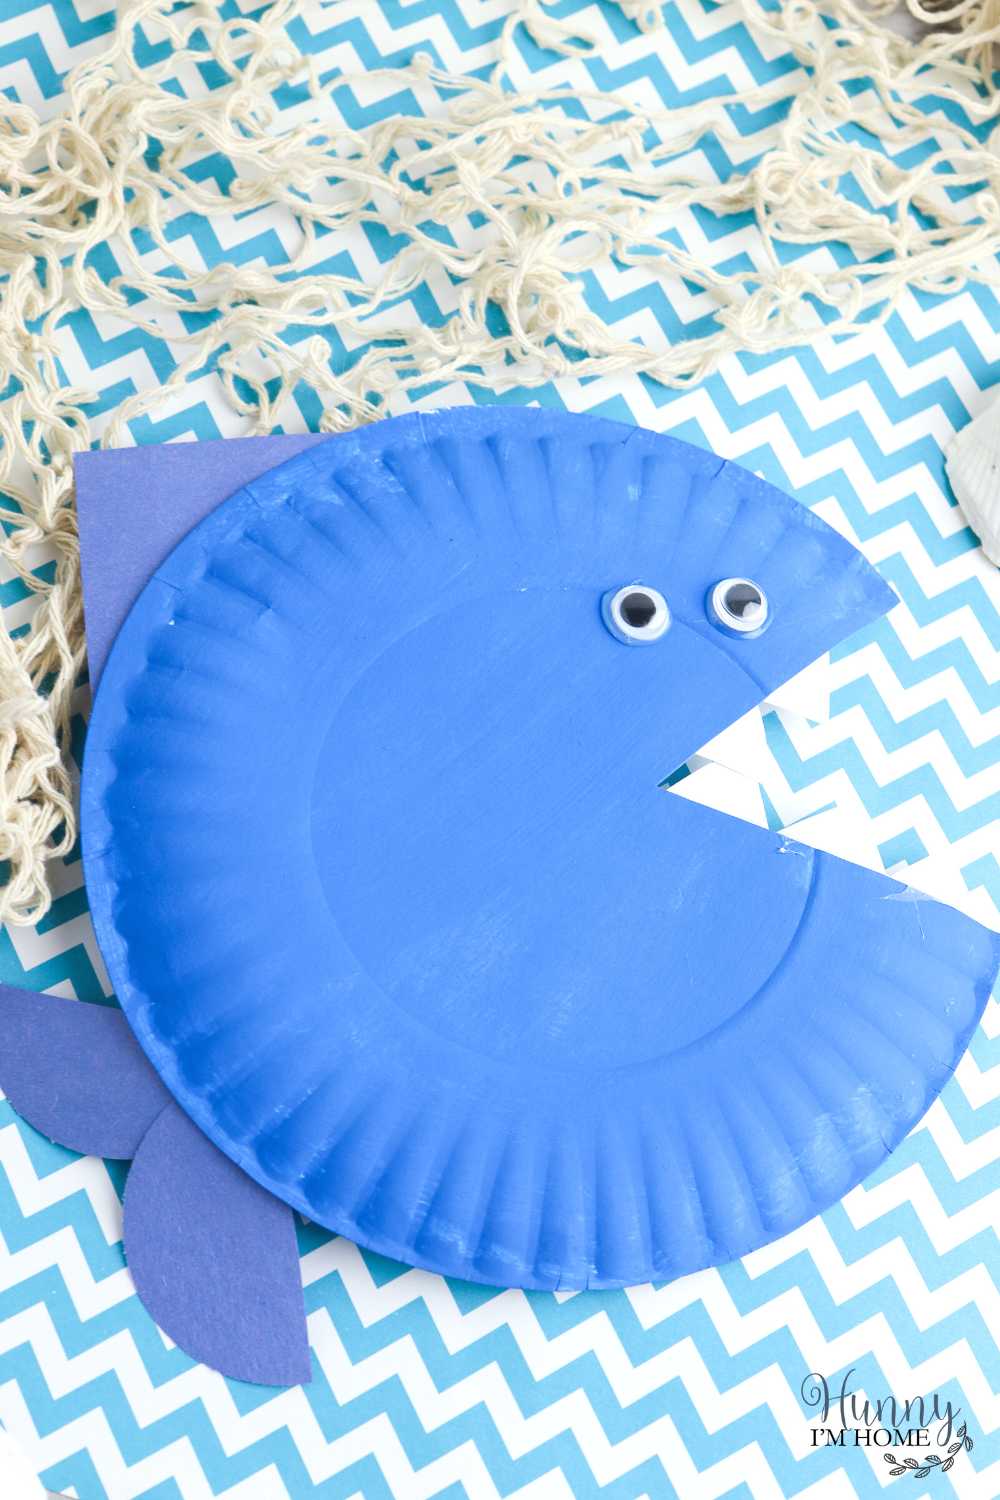 Paper Plate Crafts for Toddlers - My Bored Toddler